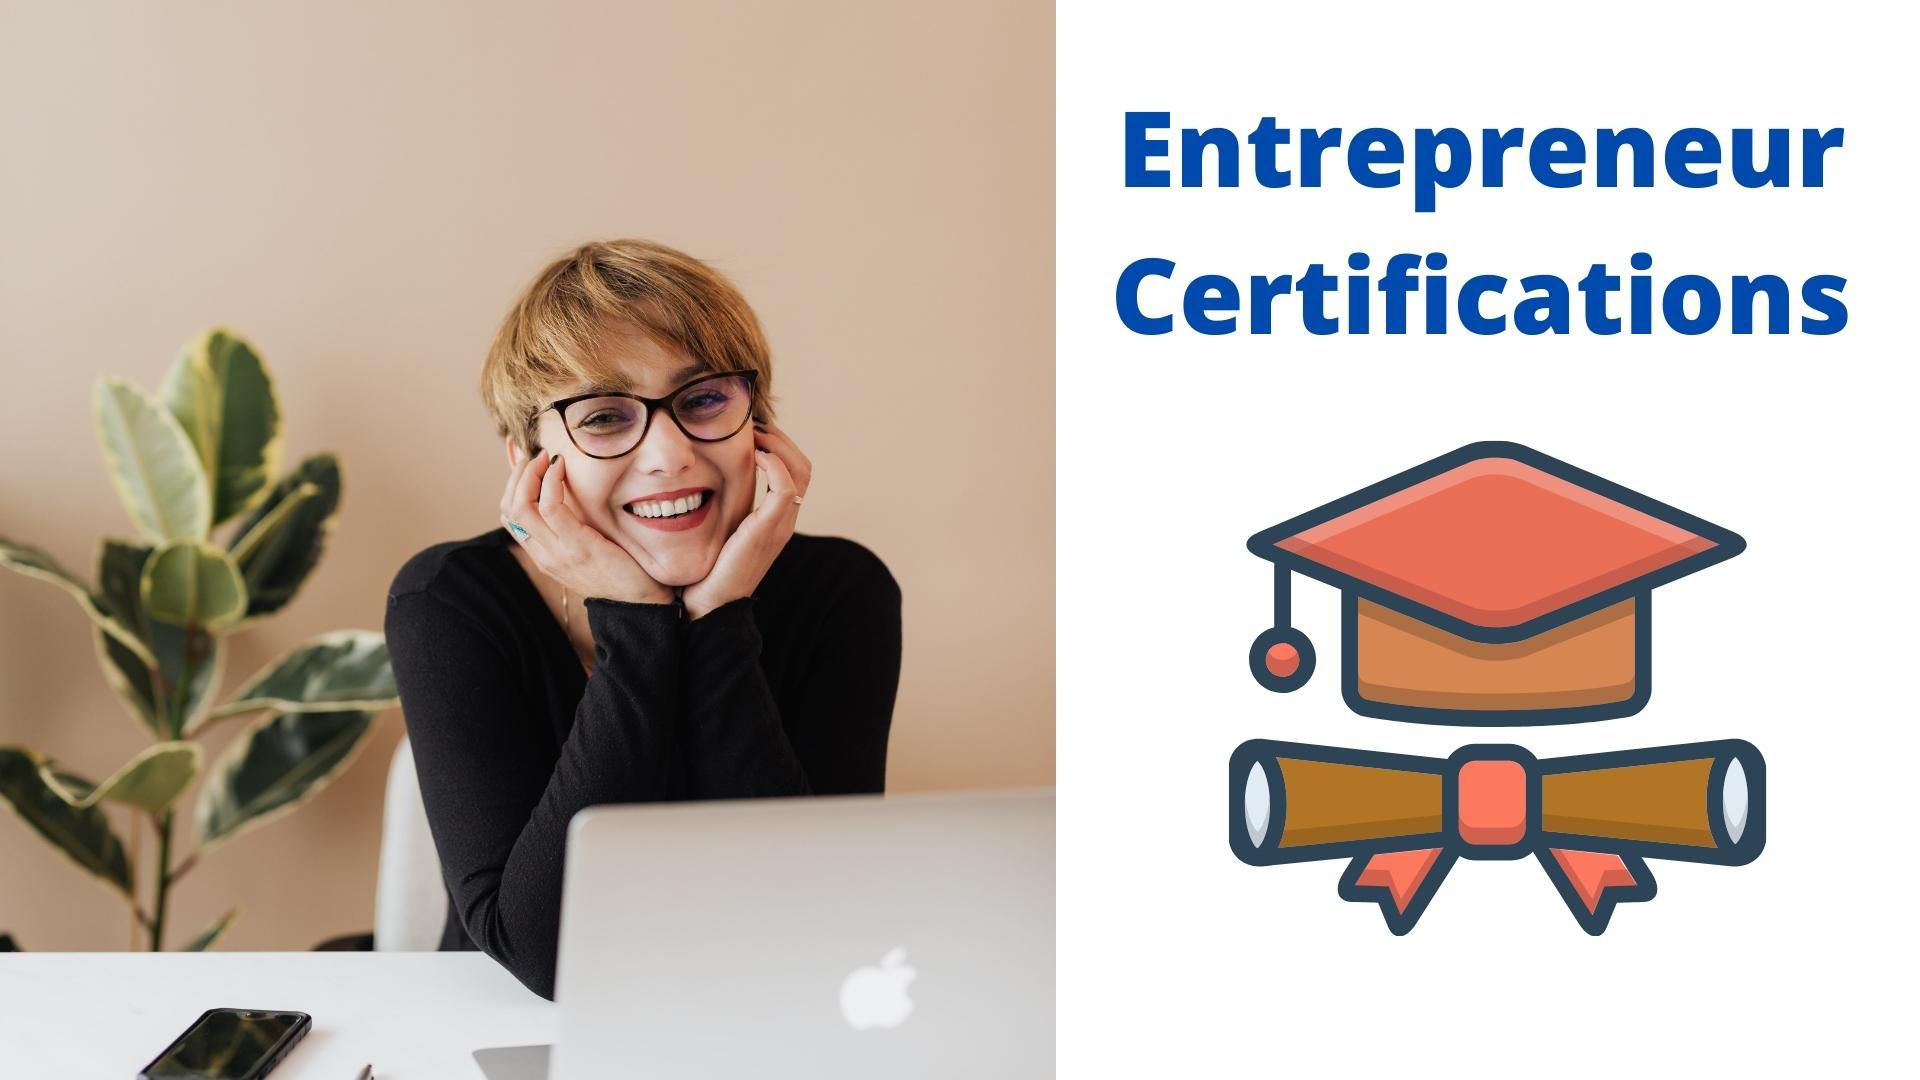 Entrepreneur Certifications: Useful Tips From ExpertsEntrepreneur Certifications can make you a successful business owner. There is always something new to learn, no matter how much experience you have, how many degrees you have, or how well-known you become. Staying on top of current trends is important for all entrepreneurs. What worked yesterday may not work tomorrow. Thus, you shouldn't rely on your previous successes. Make sure to stay up to date on new technologies, demands, and methods to improve your business and stay relevant. We know that entrepreneurs have a lot on their plate already. However, it's vital to focus on self-improvement. Expanding your education allows you to stay updated on the newest trends and innovations. Additionally, adding to your skills allows you to make moves with your business that previously would not have been possible. For example, marketing courses teach you how to better advertise your business. Furthermore, you'll learn the legal side of marketing and know what you can and cannot say in your advertising. Maybe you don't have the time or mental energy to devote to a full-fledged college degree. However, you want to take a course that will show the time and effort you put into improving yourself and your business. Today, there are many alternatives to traditional degrees. You can earn many valuable certifications, some even from the comfort of your home. Here are five certificates you can obtain to improve your talents. 5 Entrepreneur Certifications for Your Success 1) Business Management Course A business management course will provide you with an in-depth understanding of the A-Z of running a company and its employees. The course will teach you how to navigate an office environment and how to communicate professionally. Additionally, you'll receive the tools to manage people, processes, and money. As a business manager, you bear a significant deal of responsibility. Knowing about every aspect of your company will make you a more effective business leader. You will want to know the ins and outs of administration, sales, marketing, finance, and more. In a business management course, you will learn about each of these fields and how to delegate responsibilities to your team. 2) Entrepreneurship Course for Entrepreneur Certifications Entrepreneurship classes are specifically developed to assist entrepreneurs in growing their businesses. Basically, these classes will teach you the fundamentals of starting and building a company. They provide information on identifying new prospects, devising a business plan and tactics, and managing funds and employees. Additionally, you'll learn about marketing and tending to customer needs. Beyond learning about starting a business, this type of program can help you identify strengths and skills you weren't aware you had. For example, you may come to find that you're a great salesman, marketer, or creator. Ideas you had, that perhaps you thought everyone had, may be unique and innovative. Additionally, you'll build a network of other aspiring entrepreneurs. These connections can help you succeed through shared resources, ideas, or even partnerships. 3) Time Management Course  Time management is critical in our business and personal lives. However, many of us struggle to make time for everything. New business owners often spend up to 60 hours a week getting their business off the ground. Taking a time management course will help you learn how to manage your time effectively. These courses show you how to organize your duties and prioritize them. For example, you instructor will go over how to effectively set goals, organize your tasks, and track your time virtually. Truly, we all tend to put off doing our tasks at some point. This training will help you reduce procrastination. As a result, you'll feel less stressed and be better able to keep focused on completing your tasks on time. Making a conscious effort to plan your time will help you be more productive. Additionally, it'll lessen your stress. 4) Content Marketing Certification for Entrepreneur Certifications Marketing is a huge part of the business. You'll need to let the world know your product and services are available. Today, there are a variety of online tools you can utilize to advertise your business. However, it can be difficult to navigate all of the apps and websites out there. Further, even with the ideal tools in your belt, it can be even more difficult to create ads that reach your ideal audience. Many larger companies use social media to reach their customers, but when you're just starting, most people will scroll right past your posts. Thus, you'll need the skills to identify new trends, create interesting content, and ensure you're getting seen. A content marketing certification course will teach you how to reach your audience. You'll learn how to make interesting, unique, and valuable content that will increase your audience and inevitably bring in more profit. Additionally, hiring marketing professionals is expensive, for good reason. Navigating the world of marketing is difficult. If you post content that is negatively received, it can severely impact your business and reputation. Learning how to market yourself will save you a great deal of money and pain both up-front and in the long run. 5) Certified Management Accountant for Entrepreneur Certifications Becoming a Certified Management Accountant, or CMA will help you learn how to best manage your finances. These types of programs teach you how to plan and analyze your budgets and sales. This certification has the most rigorous requirements of these certificates, but money management is where most businesses fail. Thus, learning how to manage every aspect of your finances is vital to running a successful business. To succeed, you must have reasonable budgets that you stick to, savings in case of emergencies, and the funds to maintain your business. In the end, spending the time and money to learn how to stay profitable heavily outweighs the risk of losing it all due to bad budgeting. However, becoming a CMA may be outside your budget or current education. In this case, there are alternatives. For example, you may first seek a degree in business or financial management. You may also consider enrolling in an entrepreneurial finance course. Regardless of which course you choose, becoming fluent in the world of finances greatly improves your chances of success. Final Thoughts Finding the time to attend a class or even complete a degree can be difficult for anyone. However, new entrepreneurs especially find themselves searching for time to manage their businesses and life. Adding a course on top of that can complicate things even further. Thus, it would be valuable to seek an online certificate program. Each of the above courses has an online alternative. Training websites like Udemy and Coursera offer cheap and effective online programs. Additionally, many colleges offer online alternatives nowadays. Beyond reducing the commute, most of these programs are asynchronous. This means that there is no set class time. You can turn in your work week-by-week on your own time. For example, maybe your only free time is after midnight on weekends. Obviously, this timeframe won't work for in-person classes. However, online courses allow this flexibility so that you can achieve your educational goals. Lakewood University has an Undergraduate Entrepreneur Certification Program. Students will learn terminology and basic business concepts in this 16 week program. Also, course content includes information about the functions and skills of an effective manager. The program emphasizes entrepreneurship and the hard and soft skills required for success in the sector. To summarize, there are now a variety of certification options available to you. You no longer need to attend class at a brick-and-mortar class. Instead, you can go online and improve your abilities, grow your business, and become a successful entrepreneur.